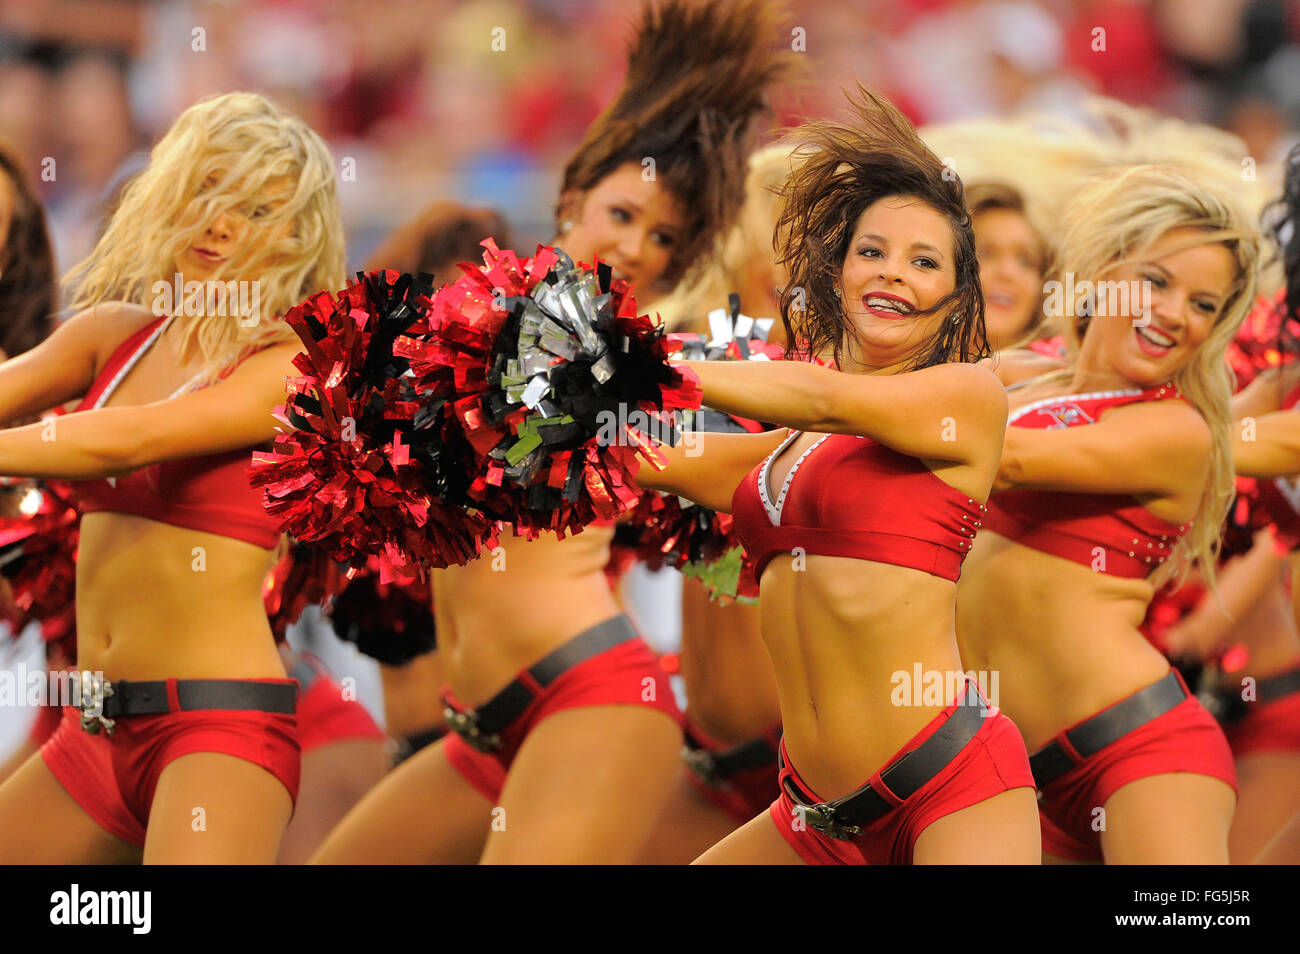 Sept. 9, 2012 - Tamap, Florida, United States of America - Tampa Bay Buccaneers cheerleaders during the Bucs game against the Carolina Panthers at Raymond James Stadium  on September 9, 2012 in Tampa, Florida.                                    ZUMA Press/Scott A. Miller  (Credit Image: © Scott A. Miller via ZUMA Wire) Stock Photo